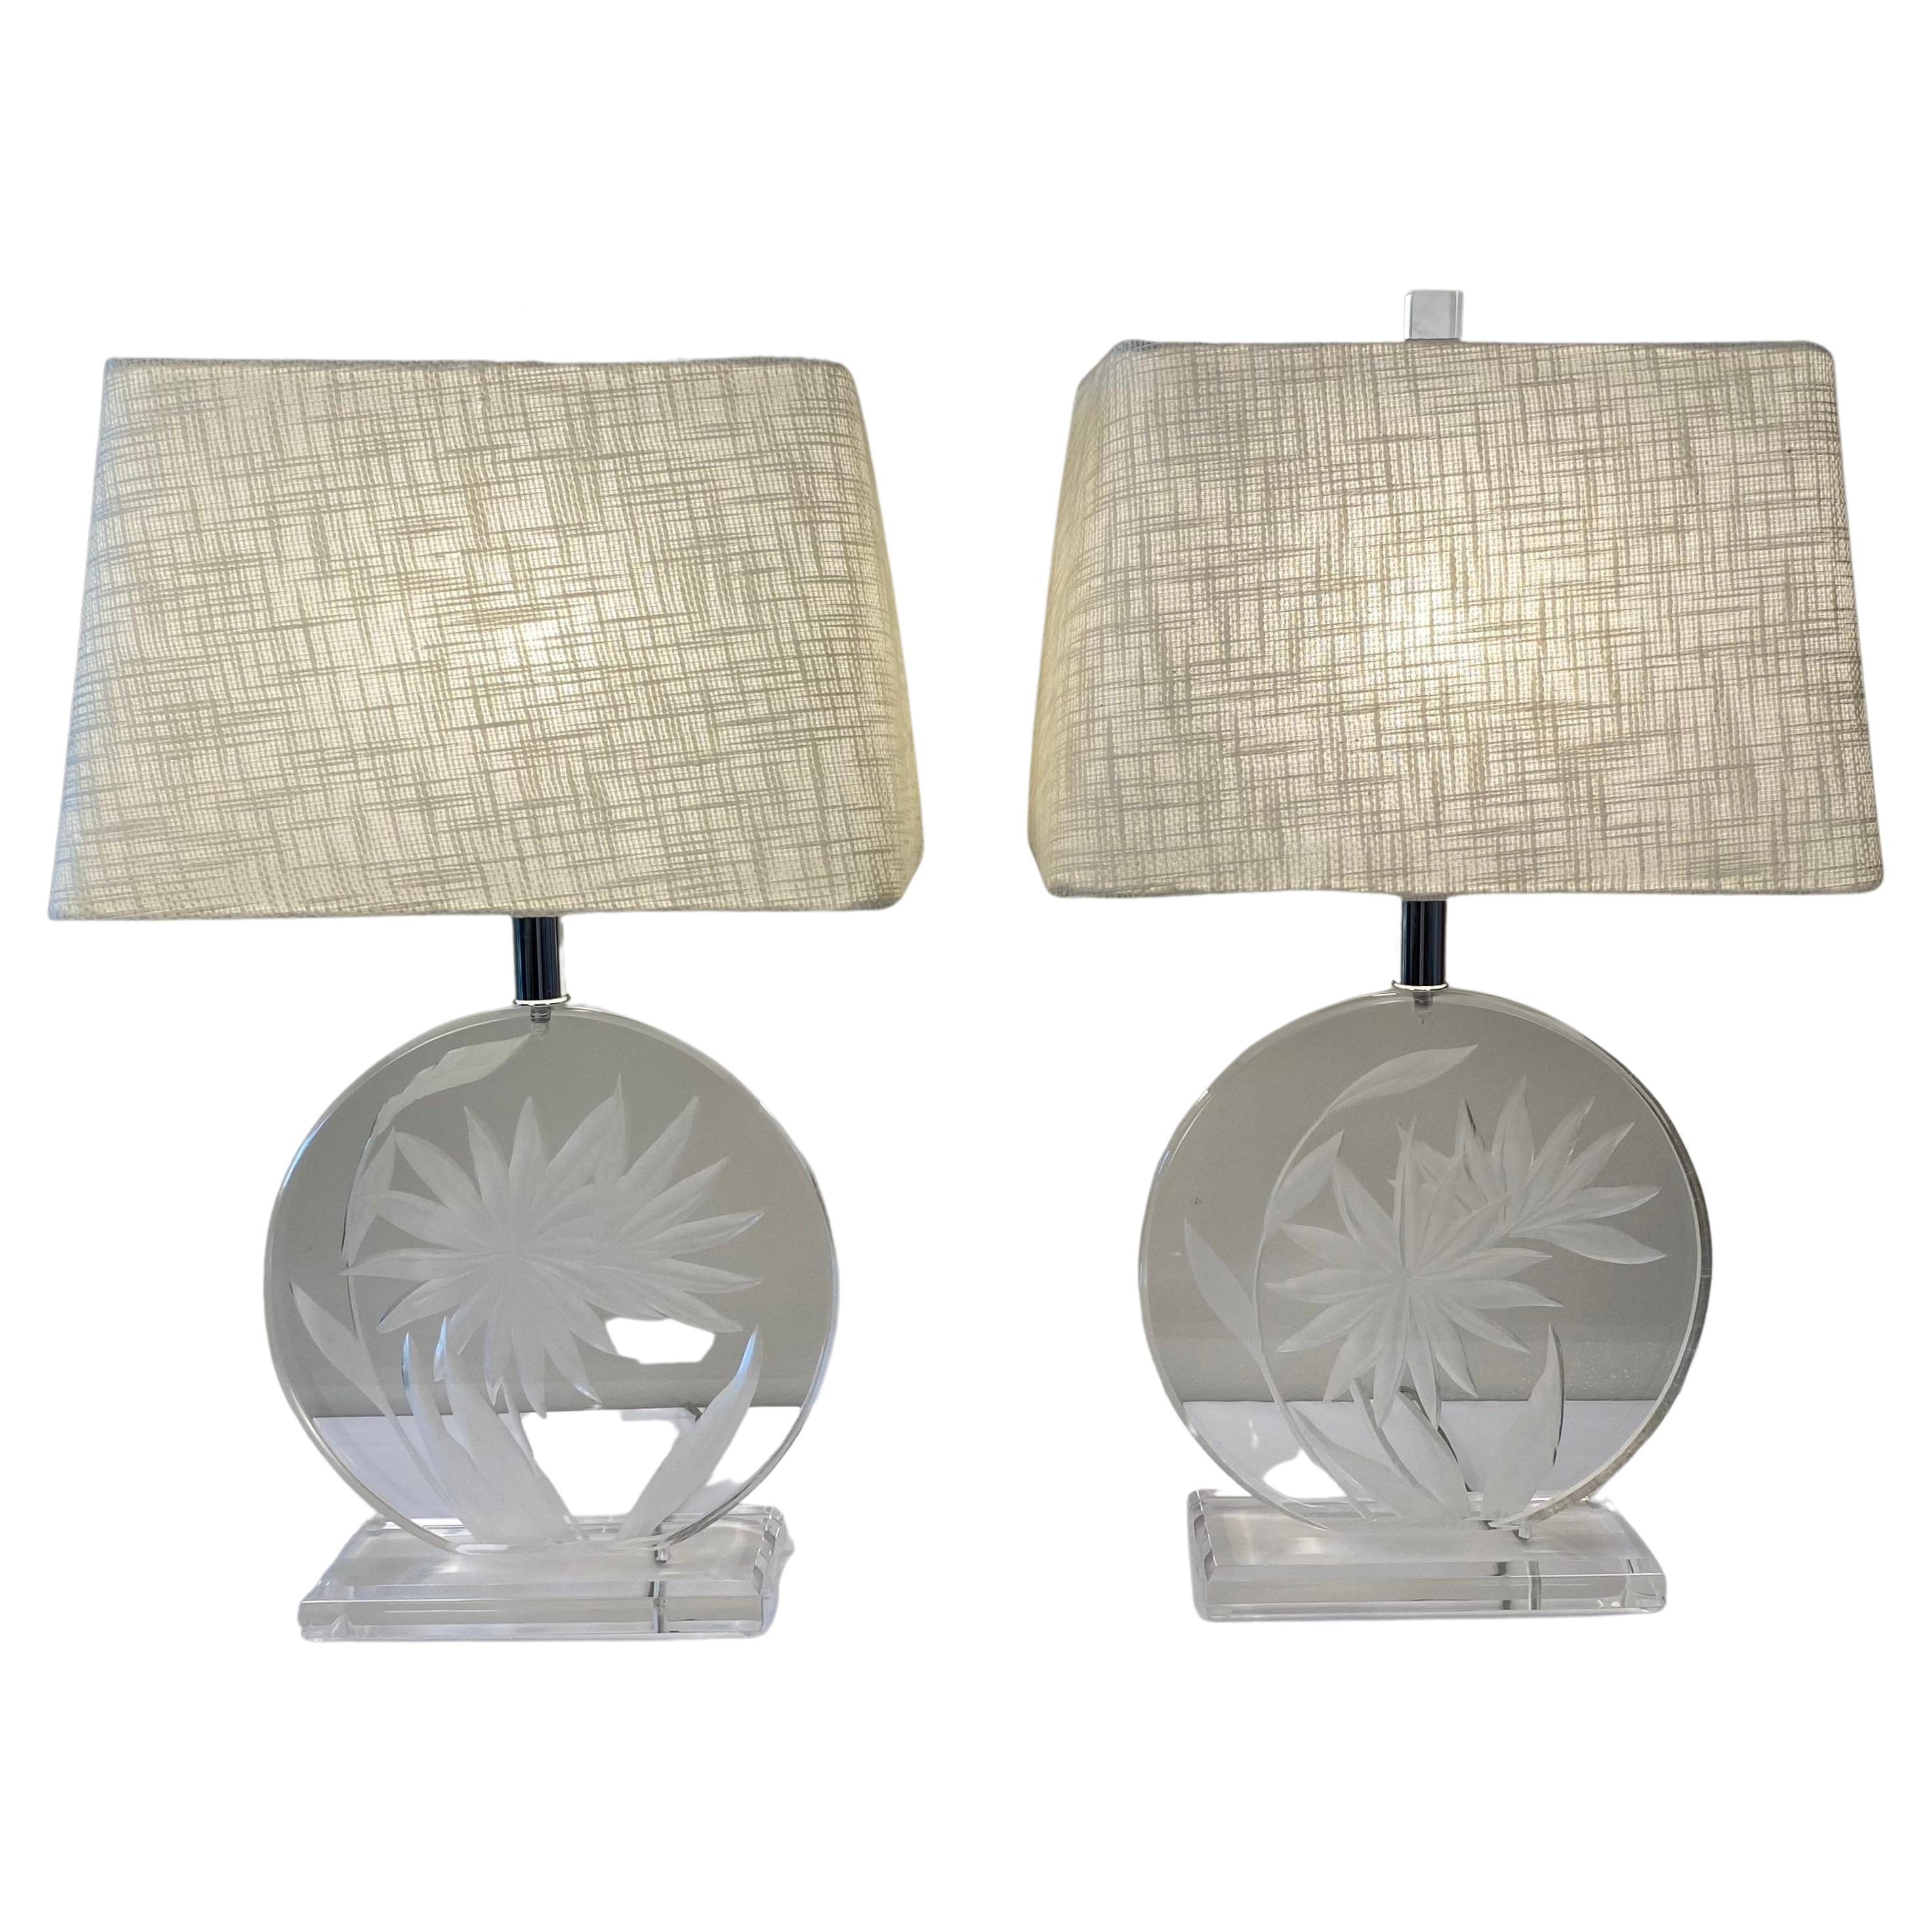 Pair of Mid-Century Modern Lucite Table Lamps in the Manner of Karl Springer